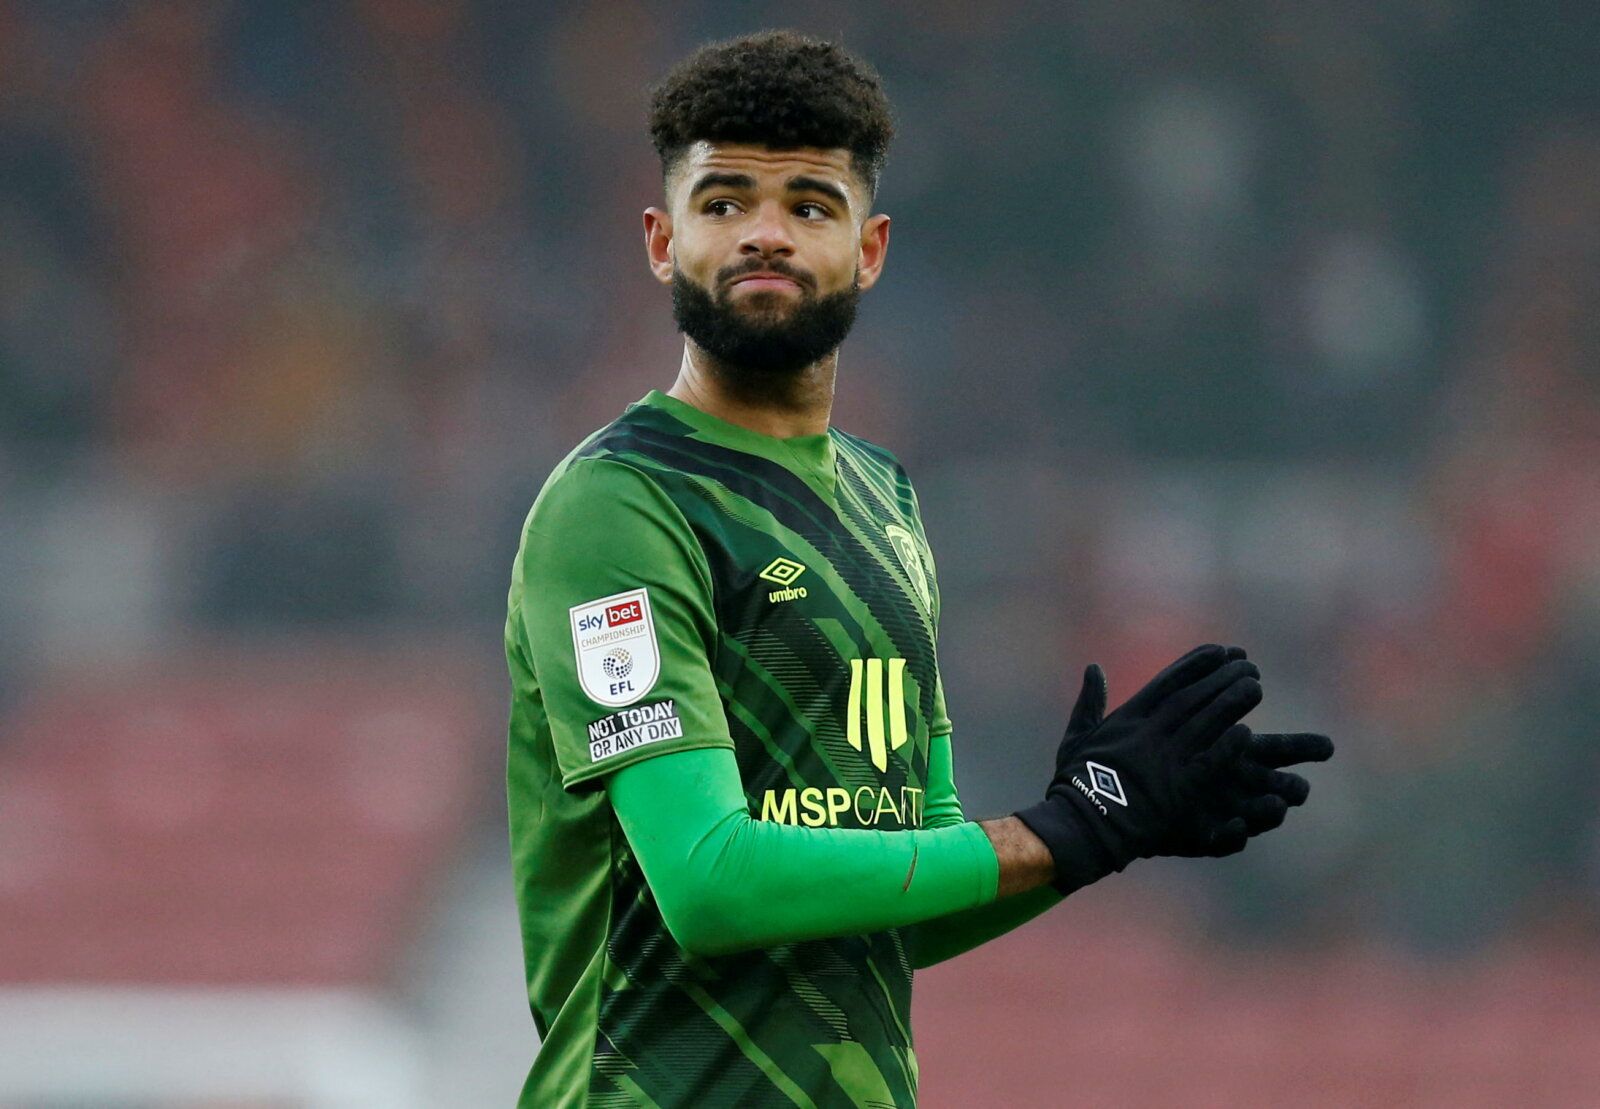 Soccer Football - Championship - Middlesbrough v AFC Bournemouth - Riverside Stadium, Middlesbrough, Britain - December 18, 2021 AFC Bournemouth's Philip Billing applauds the fans after the match  Action Images/Ed Sykes  EDITORIAL USE ONLY. No use with unauthorized audio, video, data, fixture lists, club/league logos or 